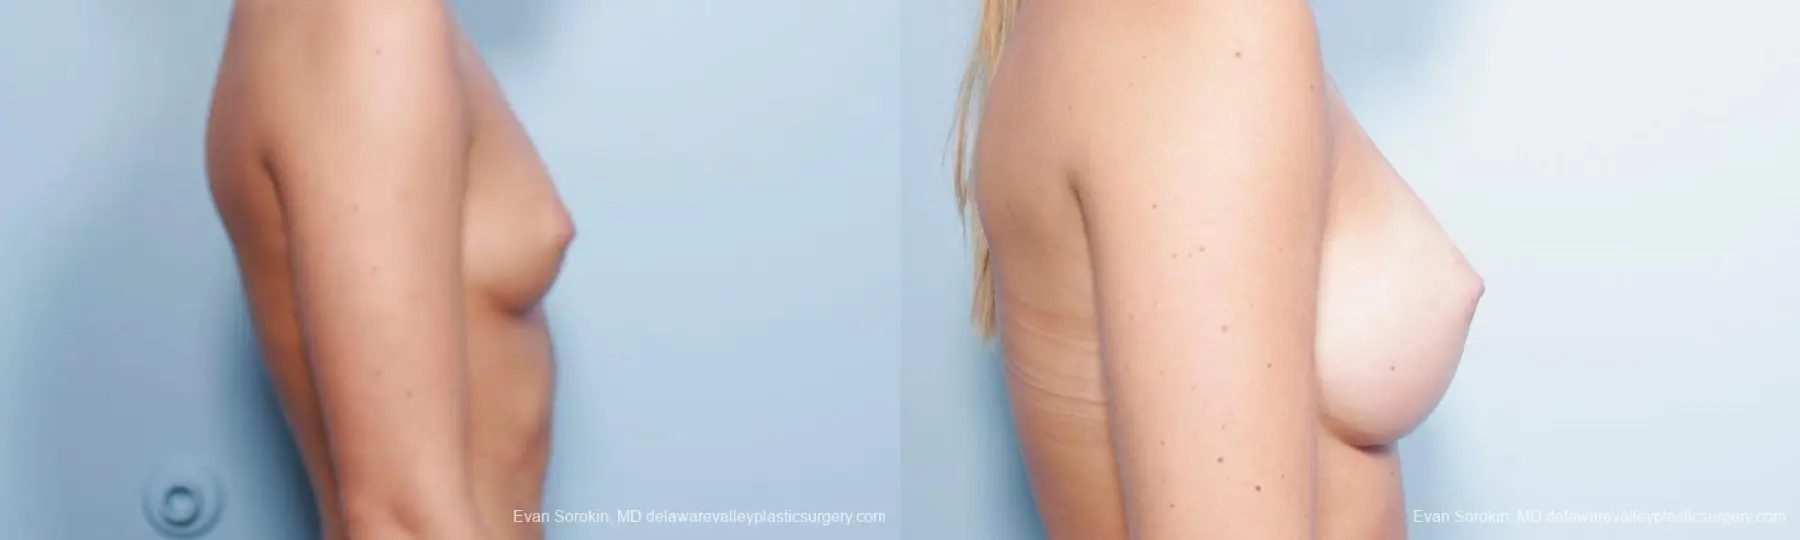 Philadelphia Breast Augmentation 9304 - Before and After 3